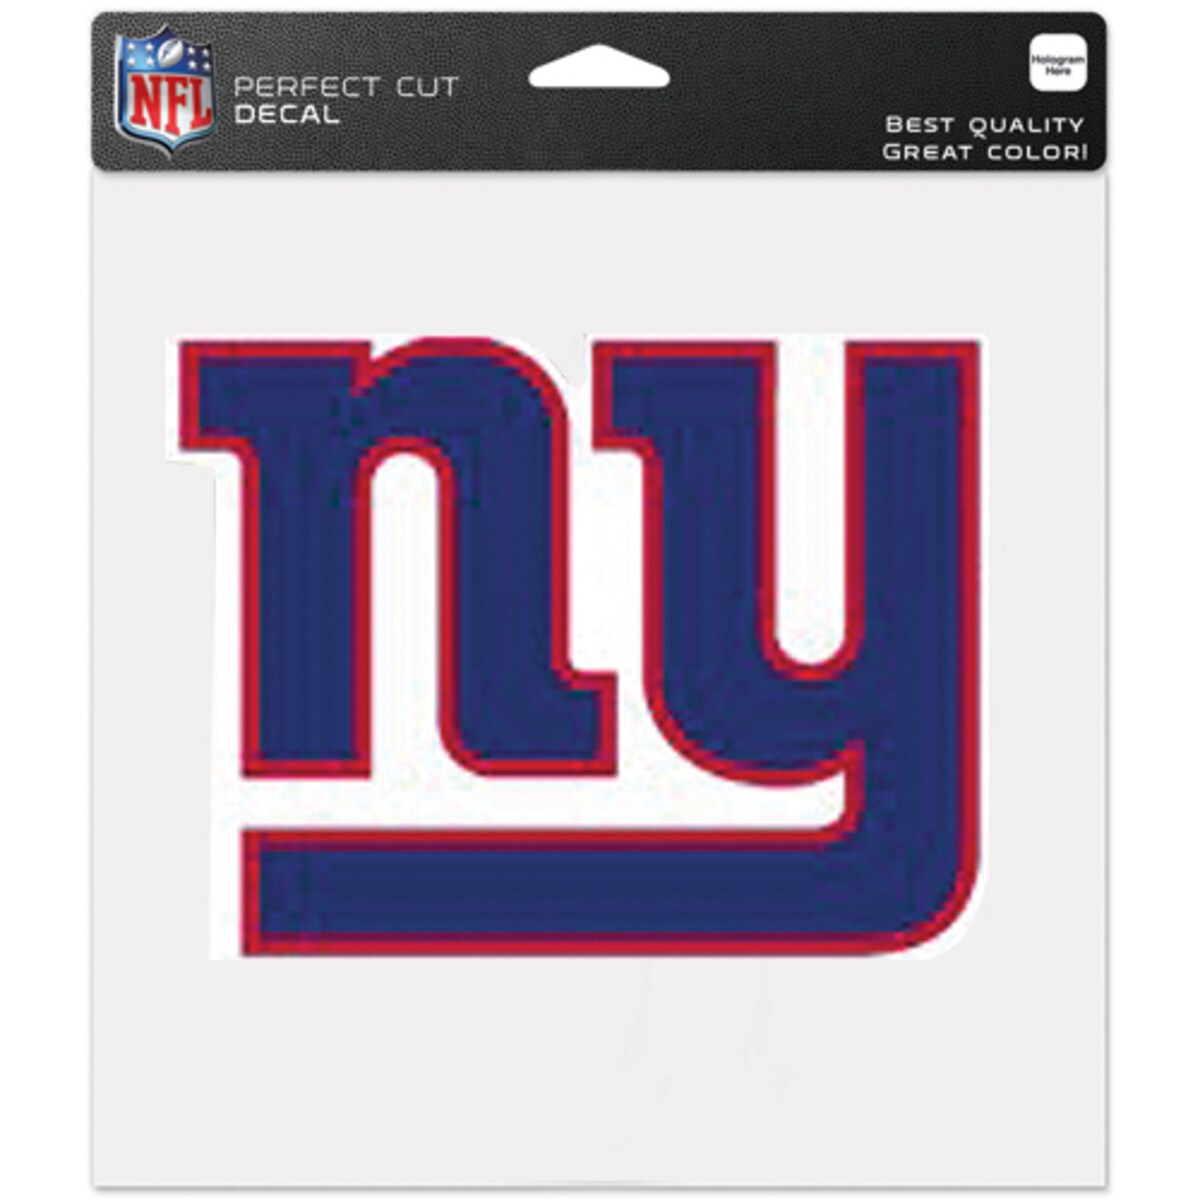 NFL ジャイアンツ カー用品・カーアクセサリー ウィンクラフト (8x8 Color Decal)